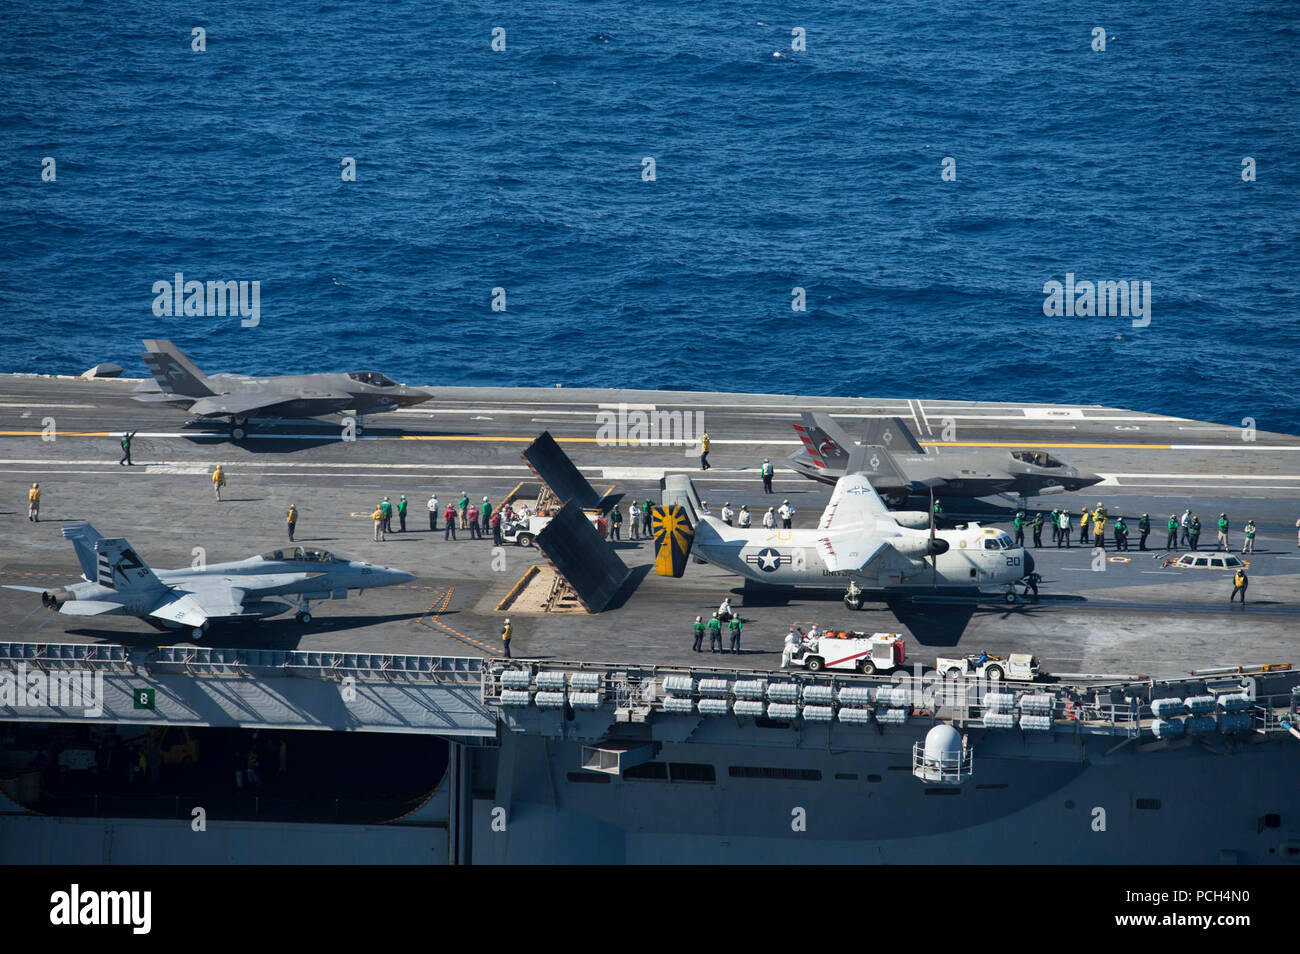 OCEAN (Nov. 4, 2014) Two F-35C Lightning II carrier variant joint strike fighters, an F/A-18 Super Hornet and a C-2A Greyhound conduct flight operations aboard the aircraft carrier USS Nimitz (CVN 68). The F-35 Lightning II Pax River Integrated Test Force from Air Test and Evaluation Squadron (VX) 23 is conducting initial at-sea testing aboard Nimitz. Stock Photo